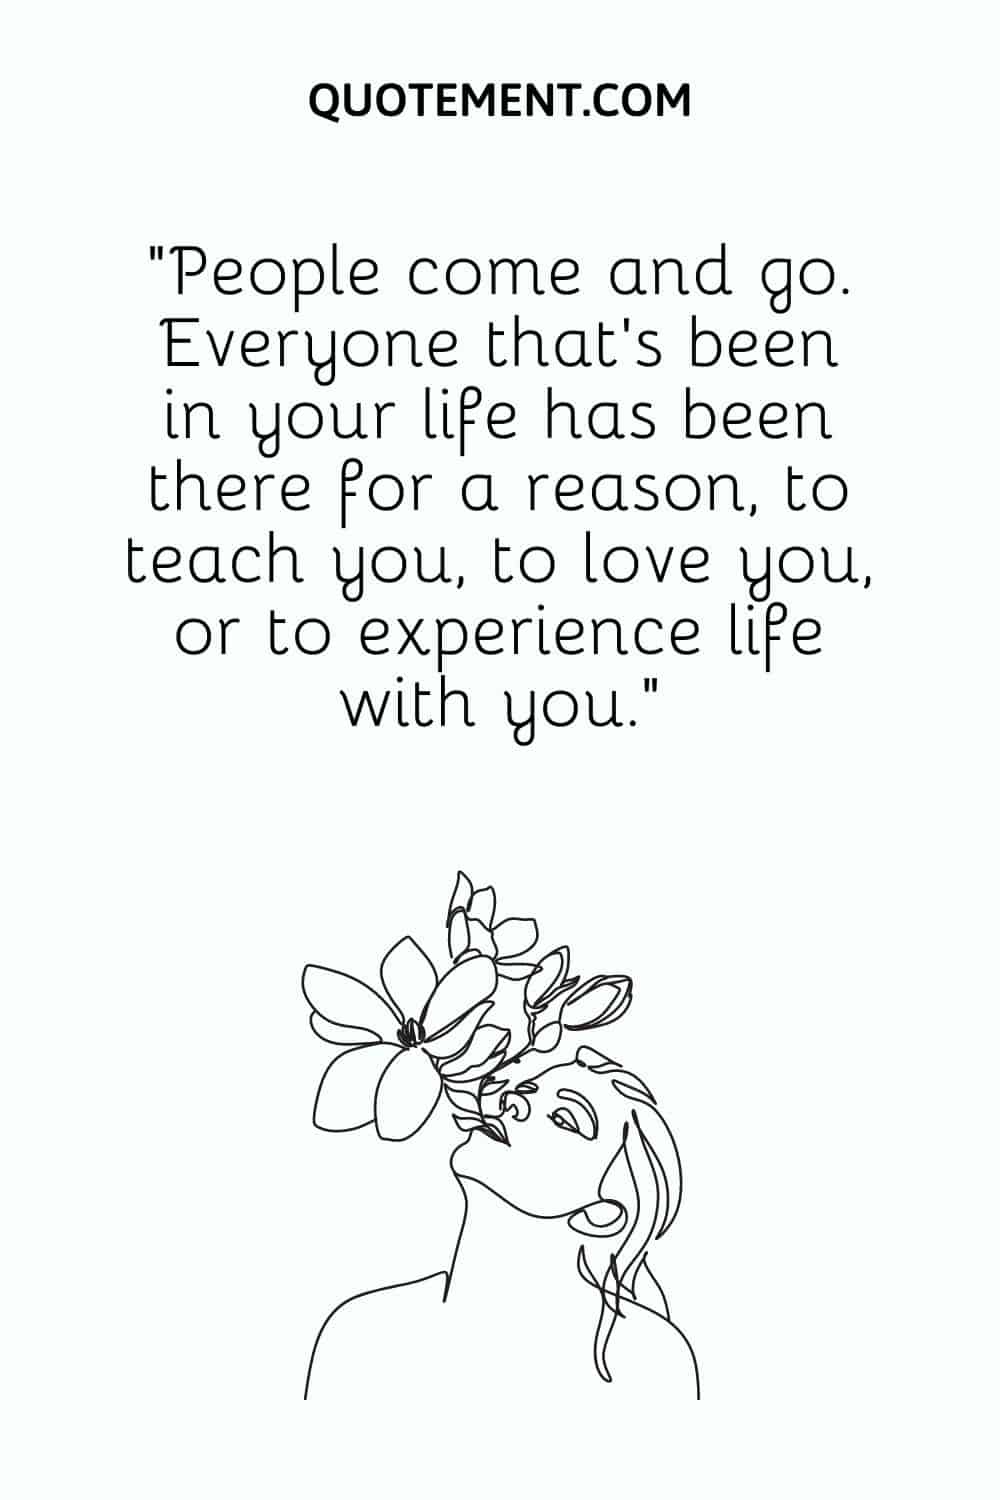 Everyone that’s been in your life has been there for a reason, to teach you, to love you, or to experience life with you